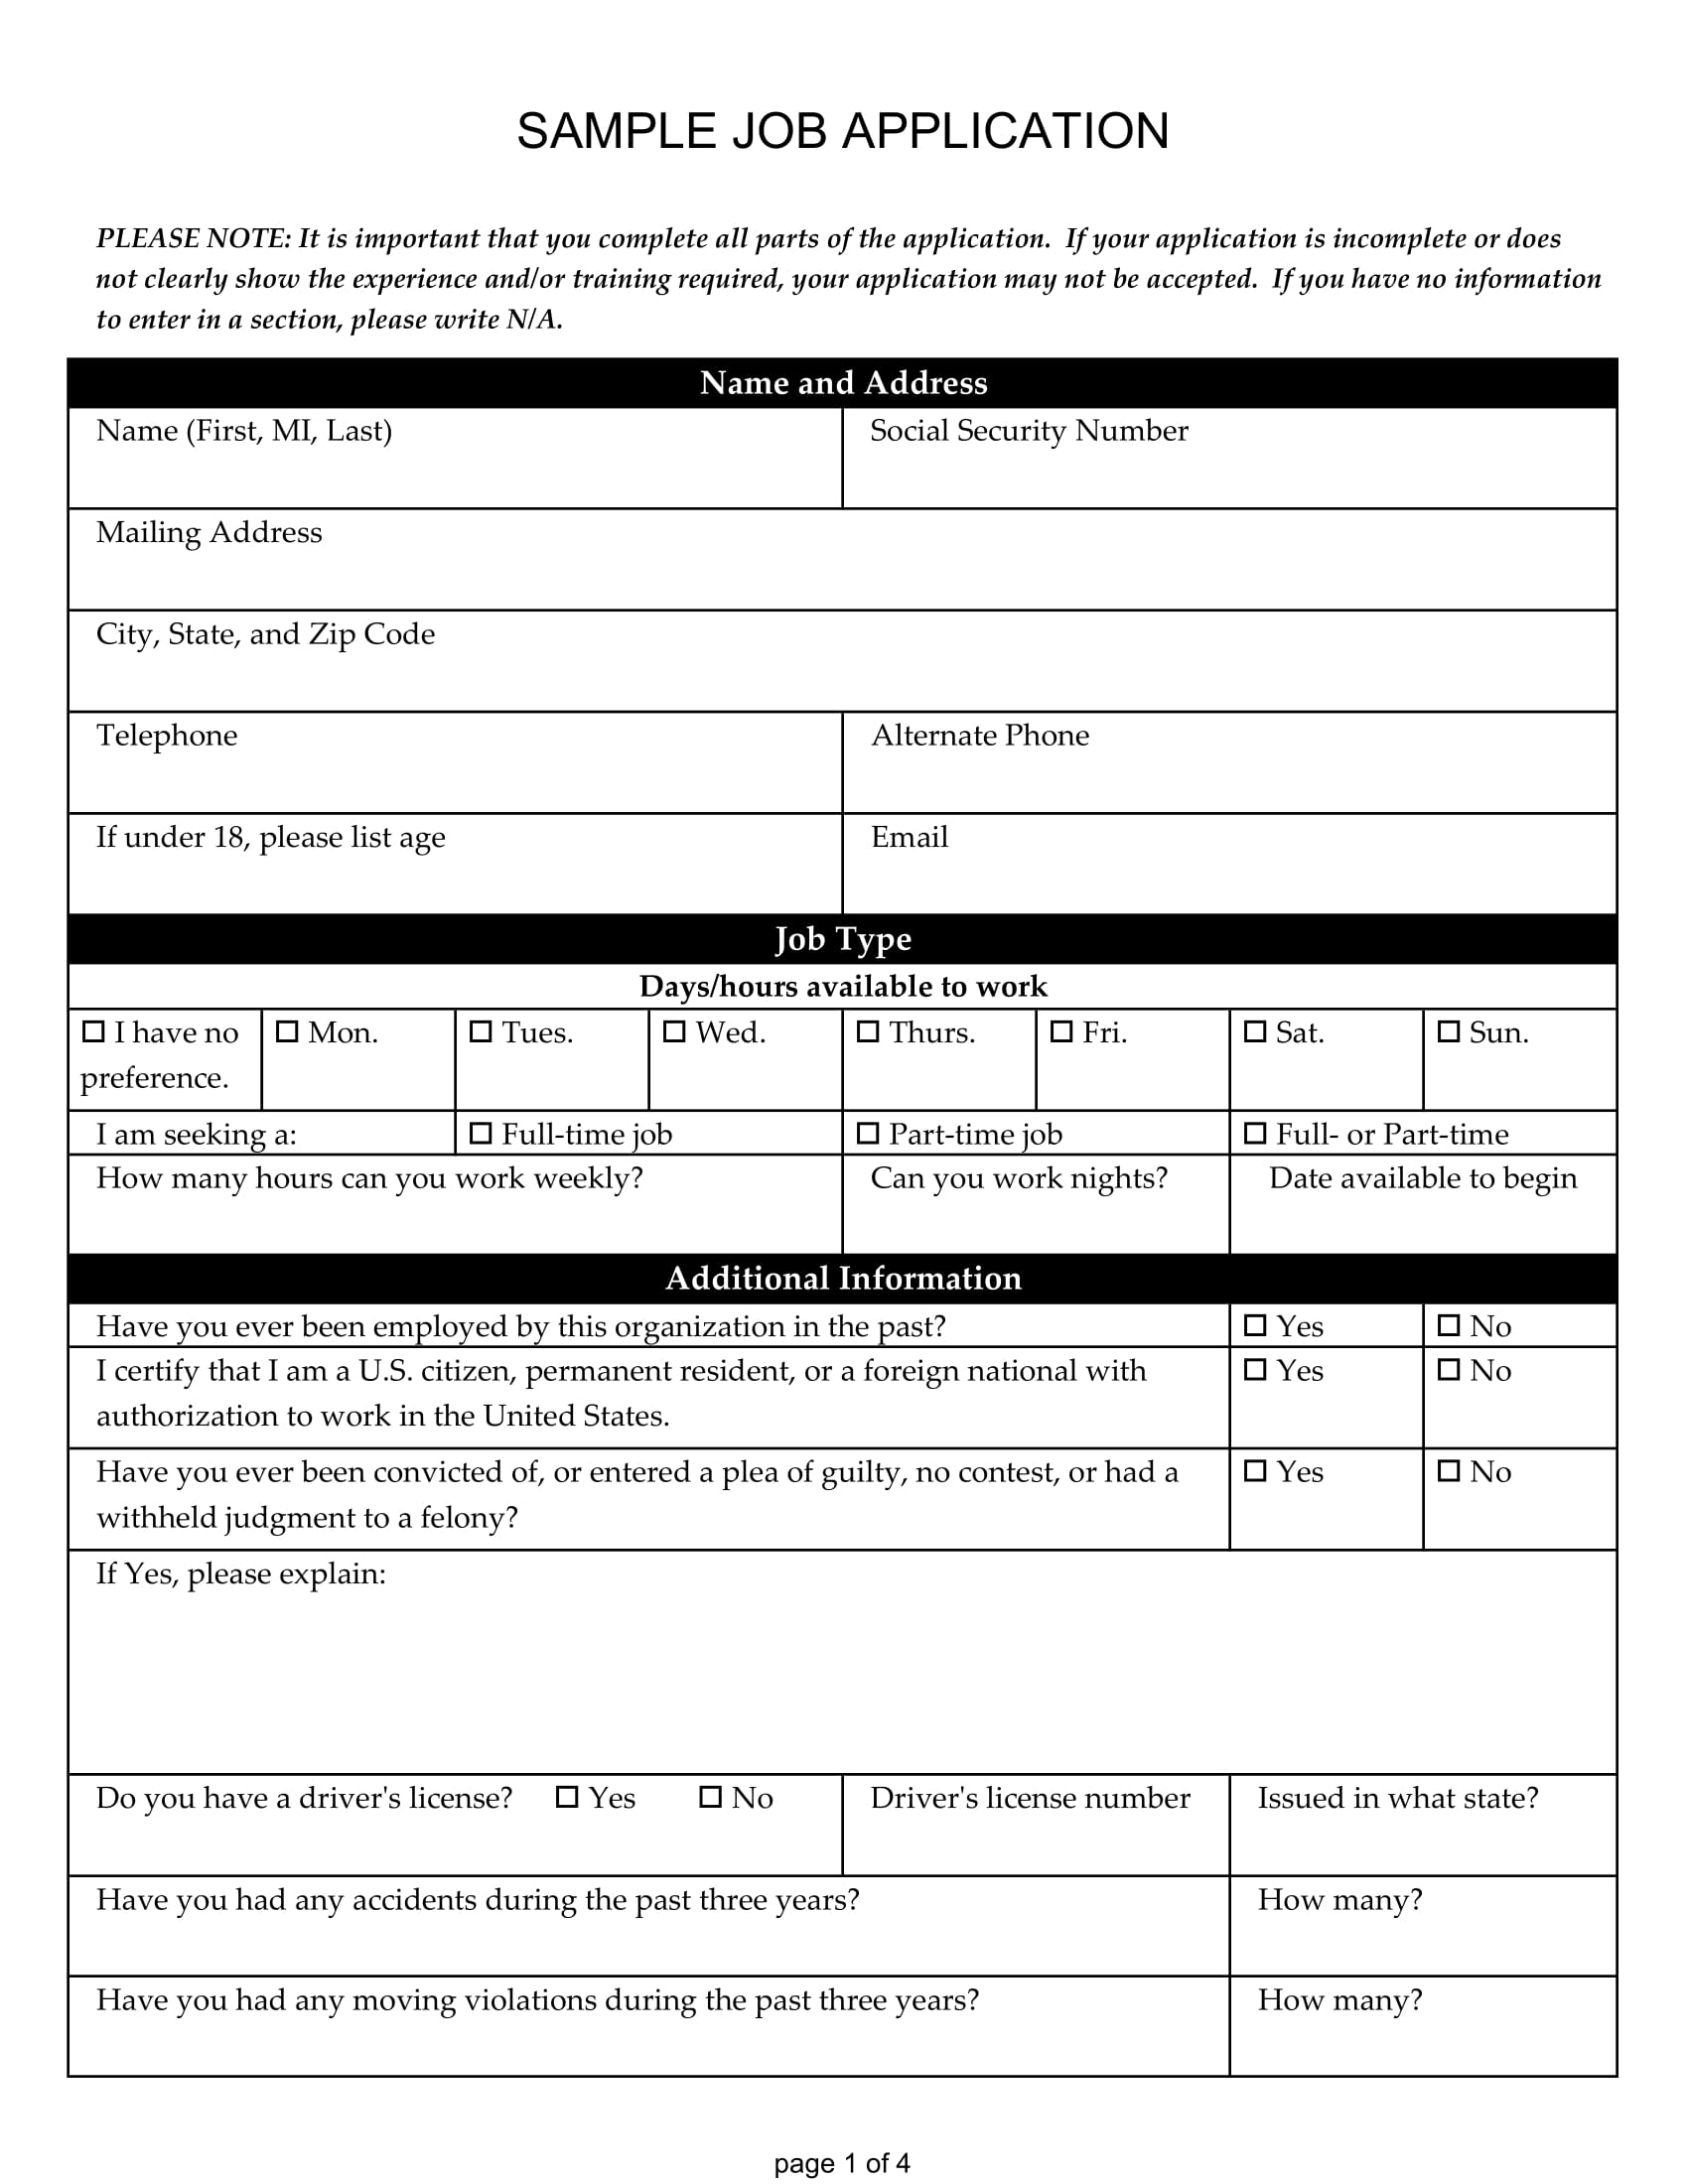 How To Fill Employment Pass Application Form Singapore - Darrin Kenney